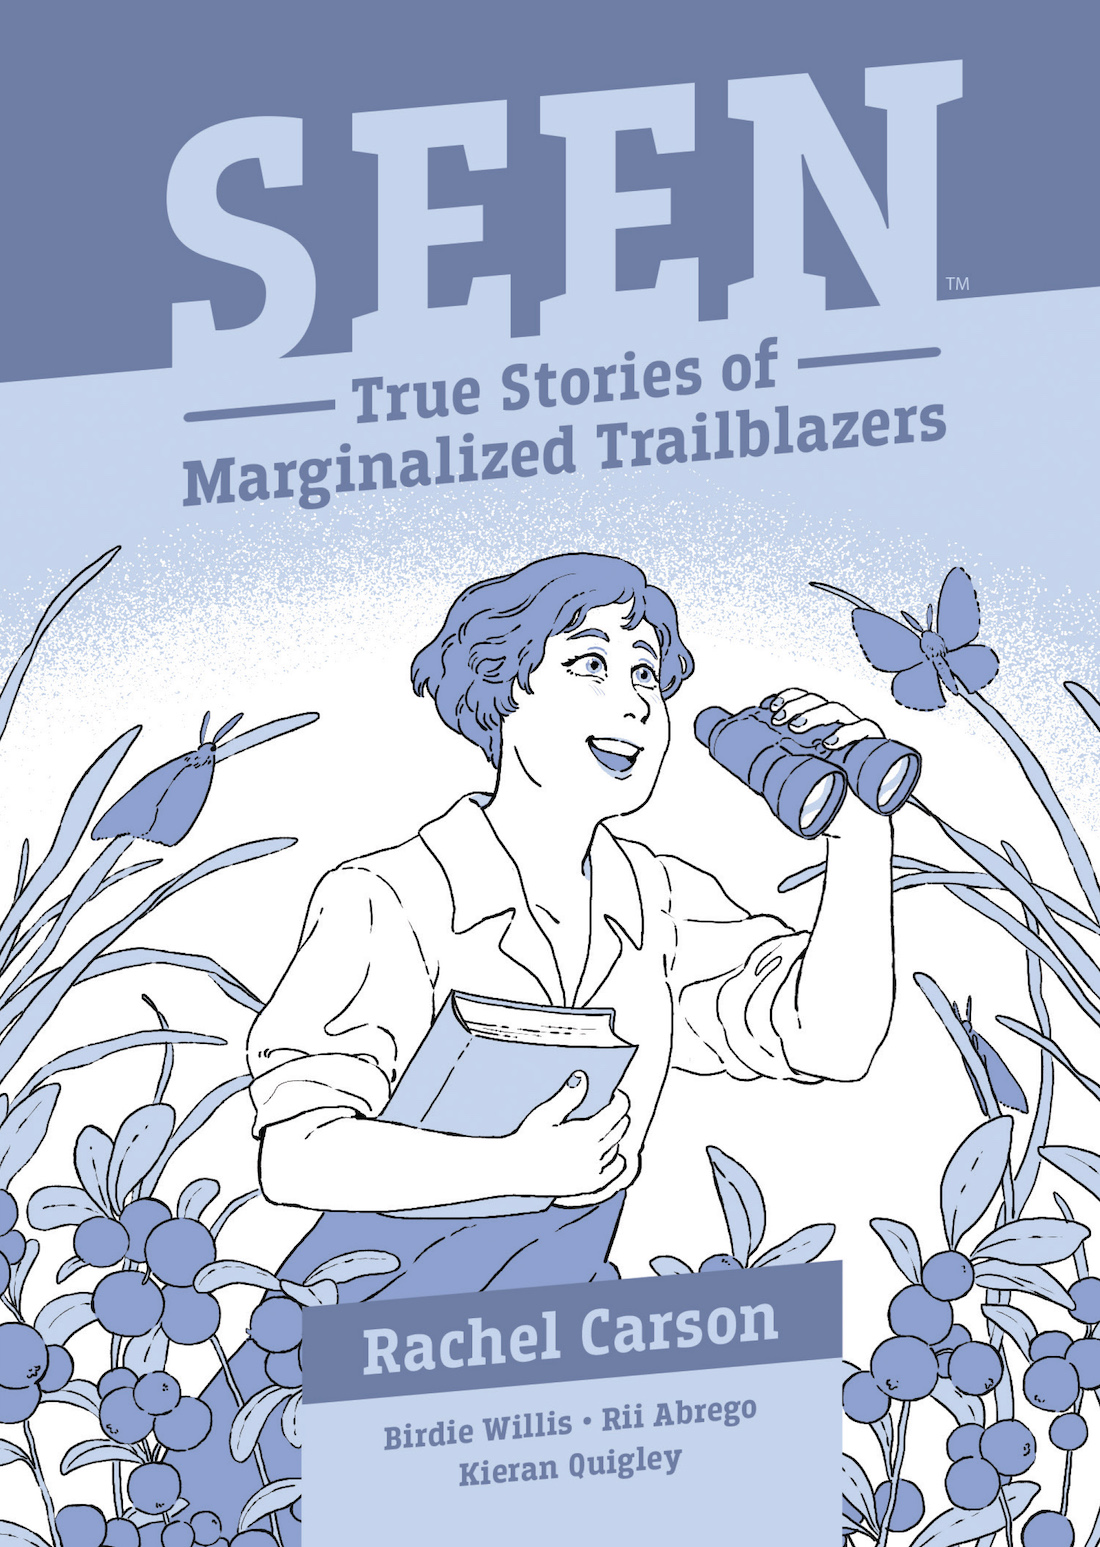 Cover to the Rachel Carson edition of the graphic novel series Seen: True Stories of Marginalized Trailblazers